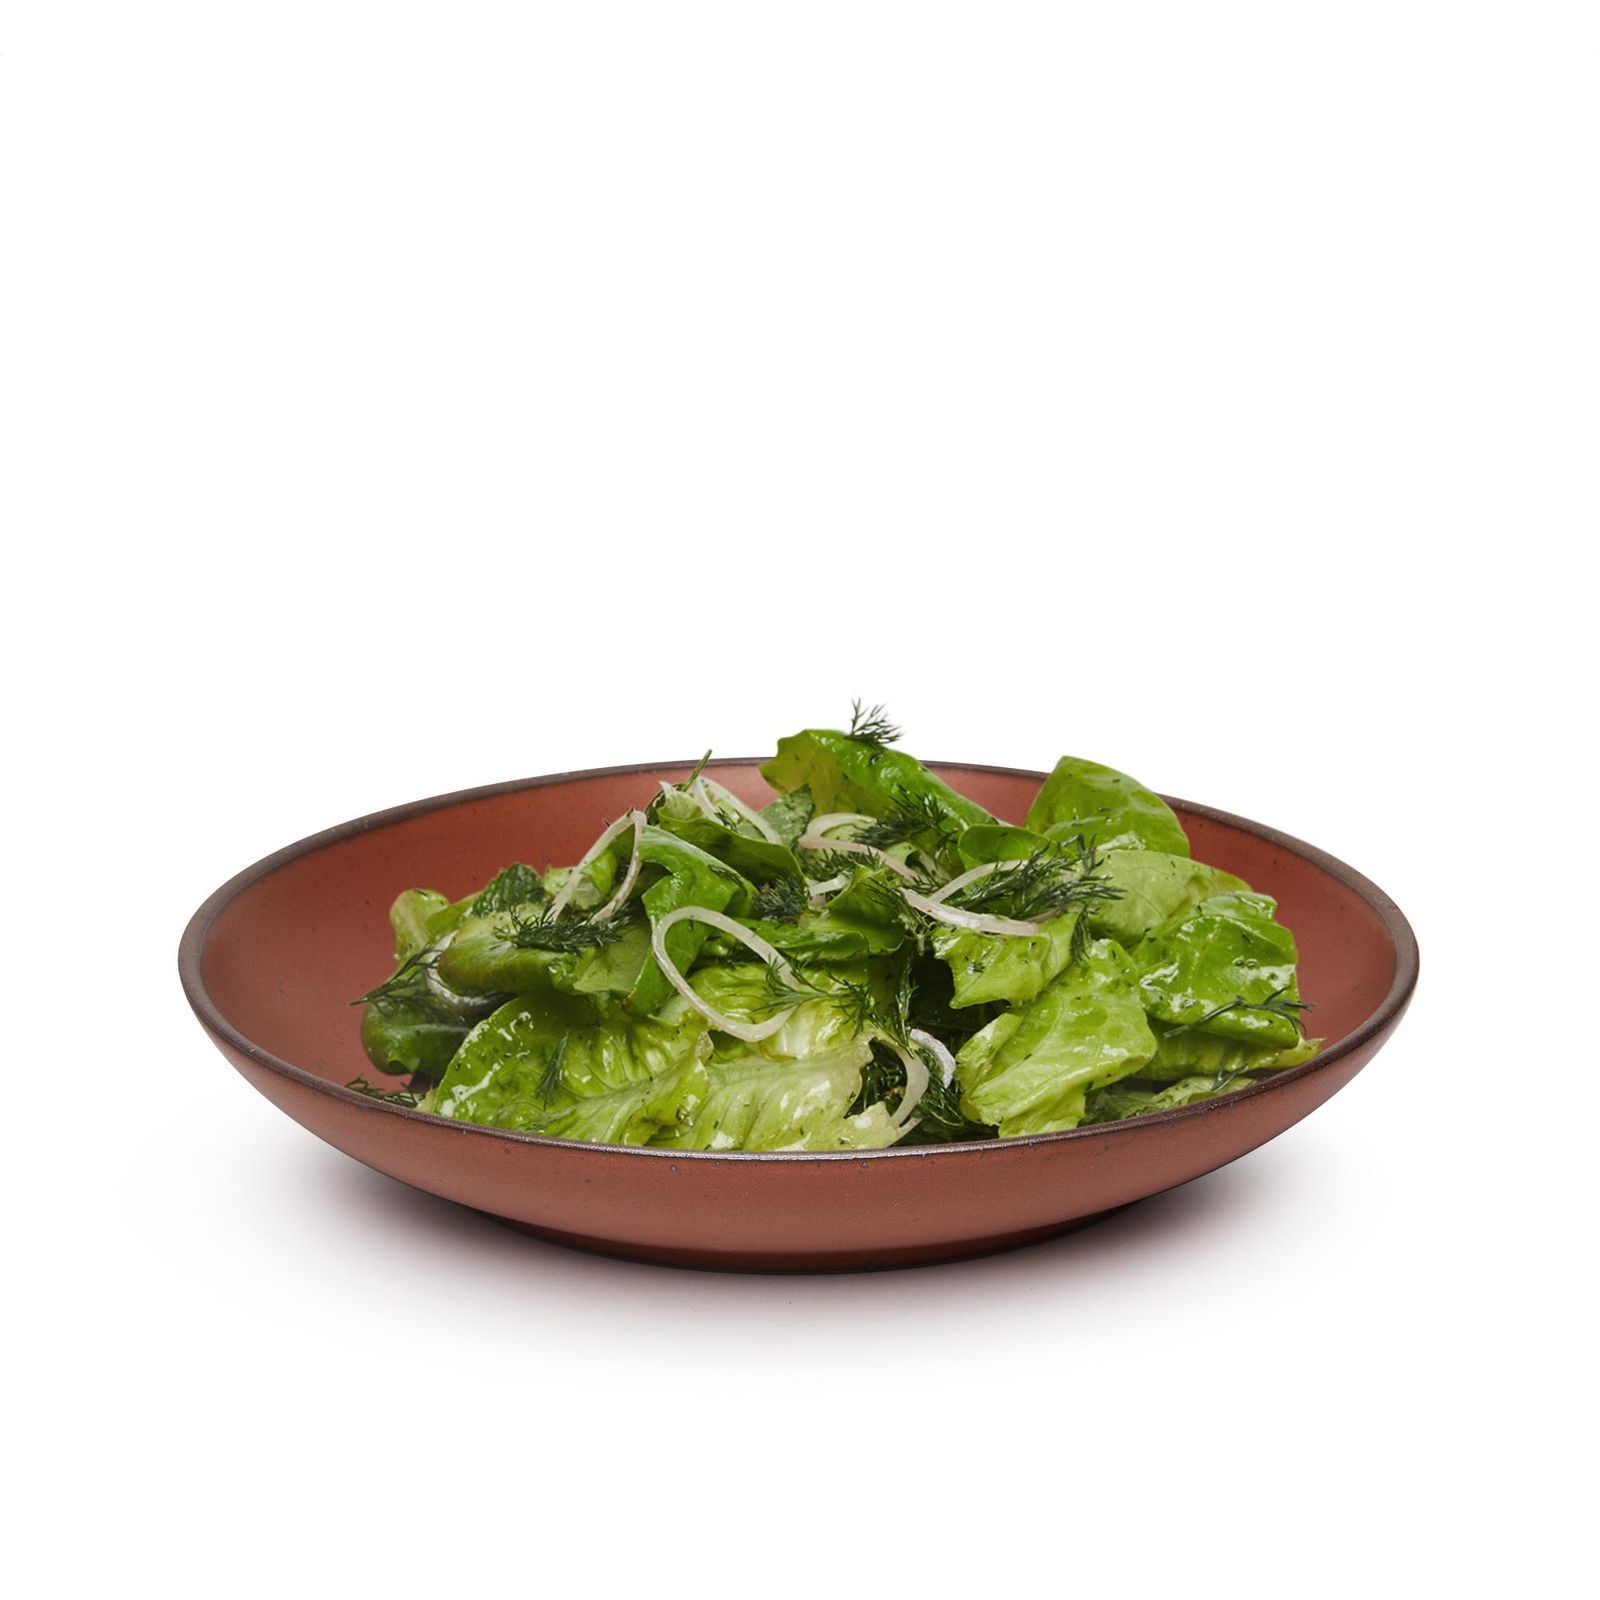 A burnt red (amaro) colored dish with a simple green salad on top. The dish is not quite a bowl, not quite a plate. It has rounded edges to keep dressing and sauce from dipping off the side.